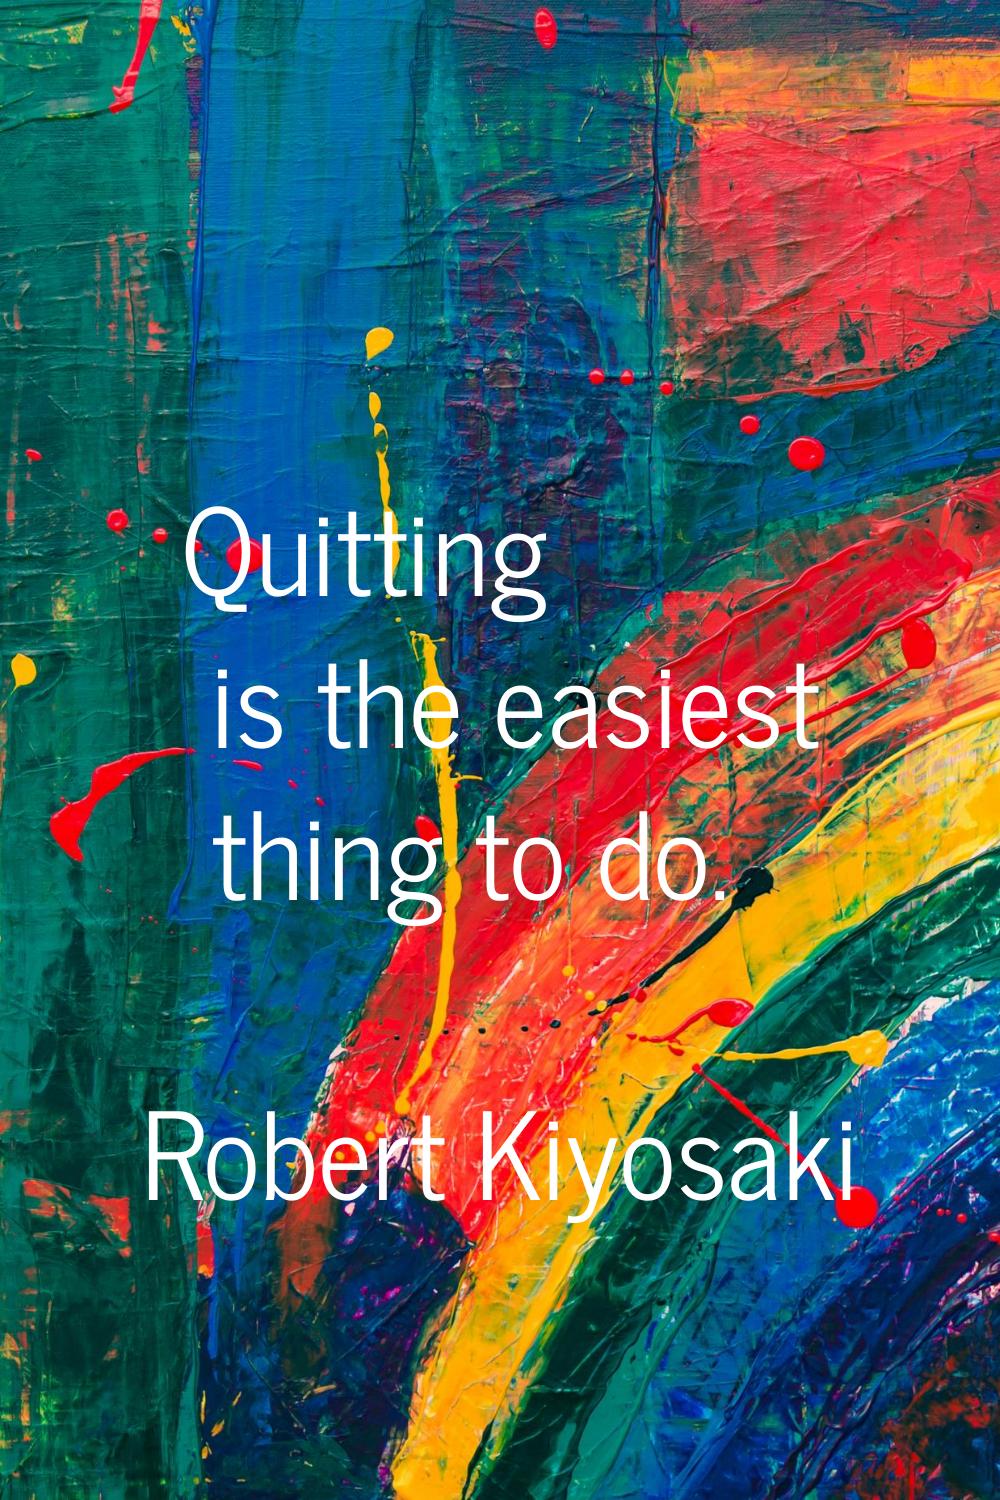 Quitting is the easiest thing to do.